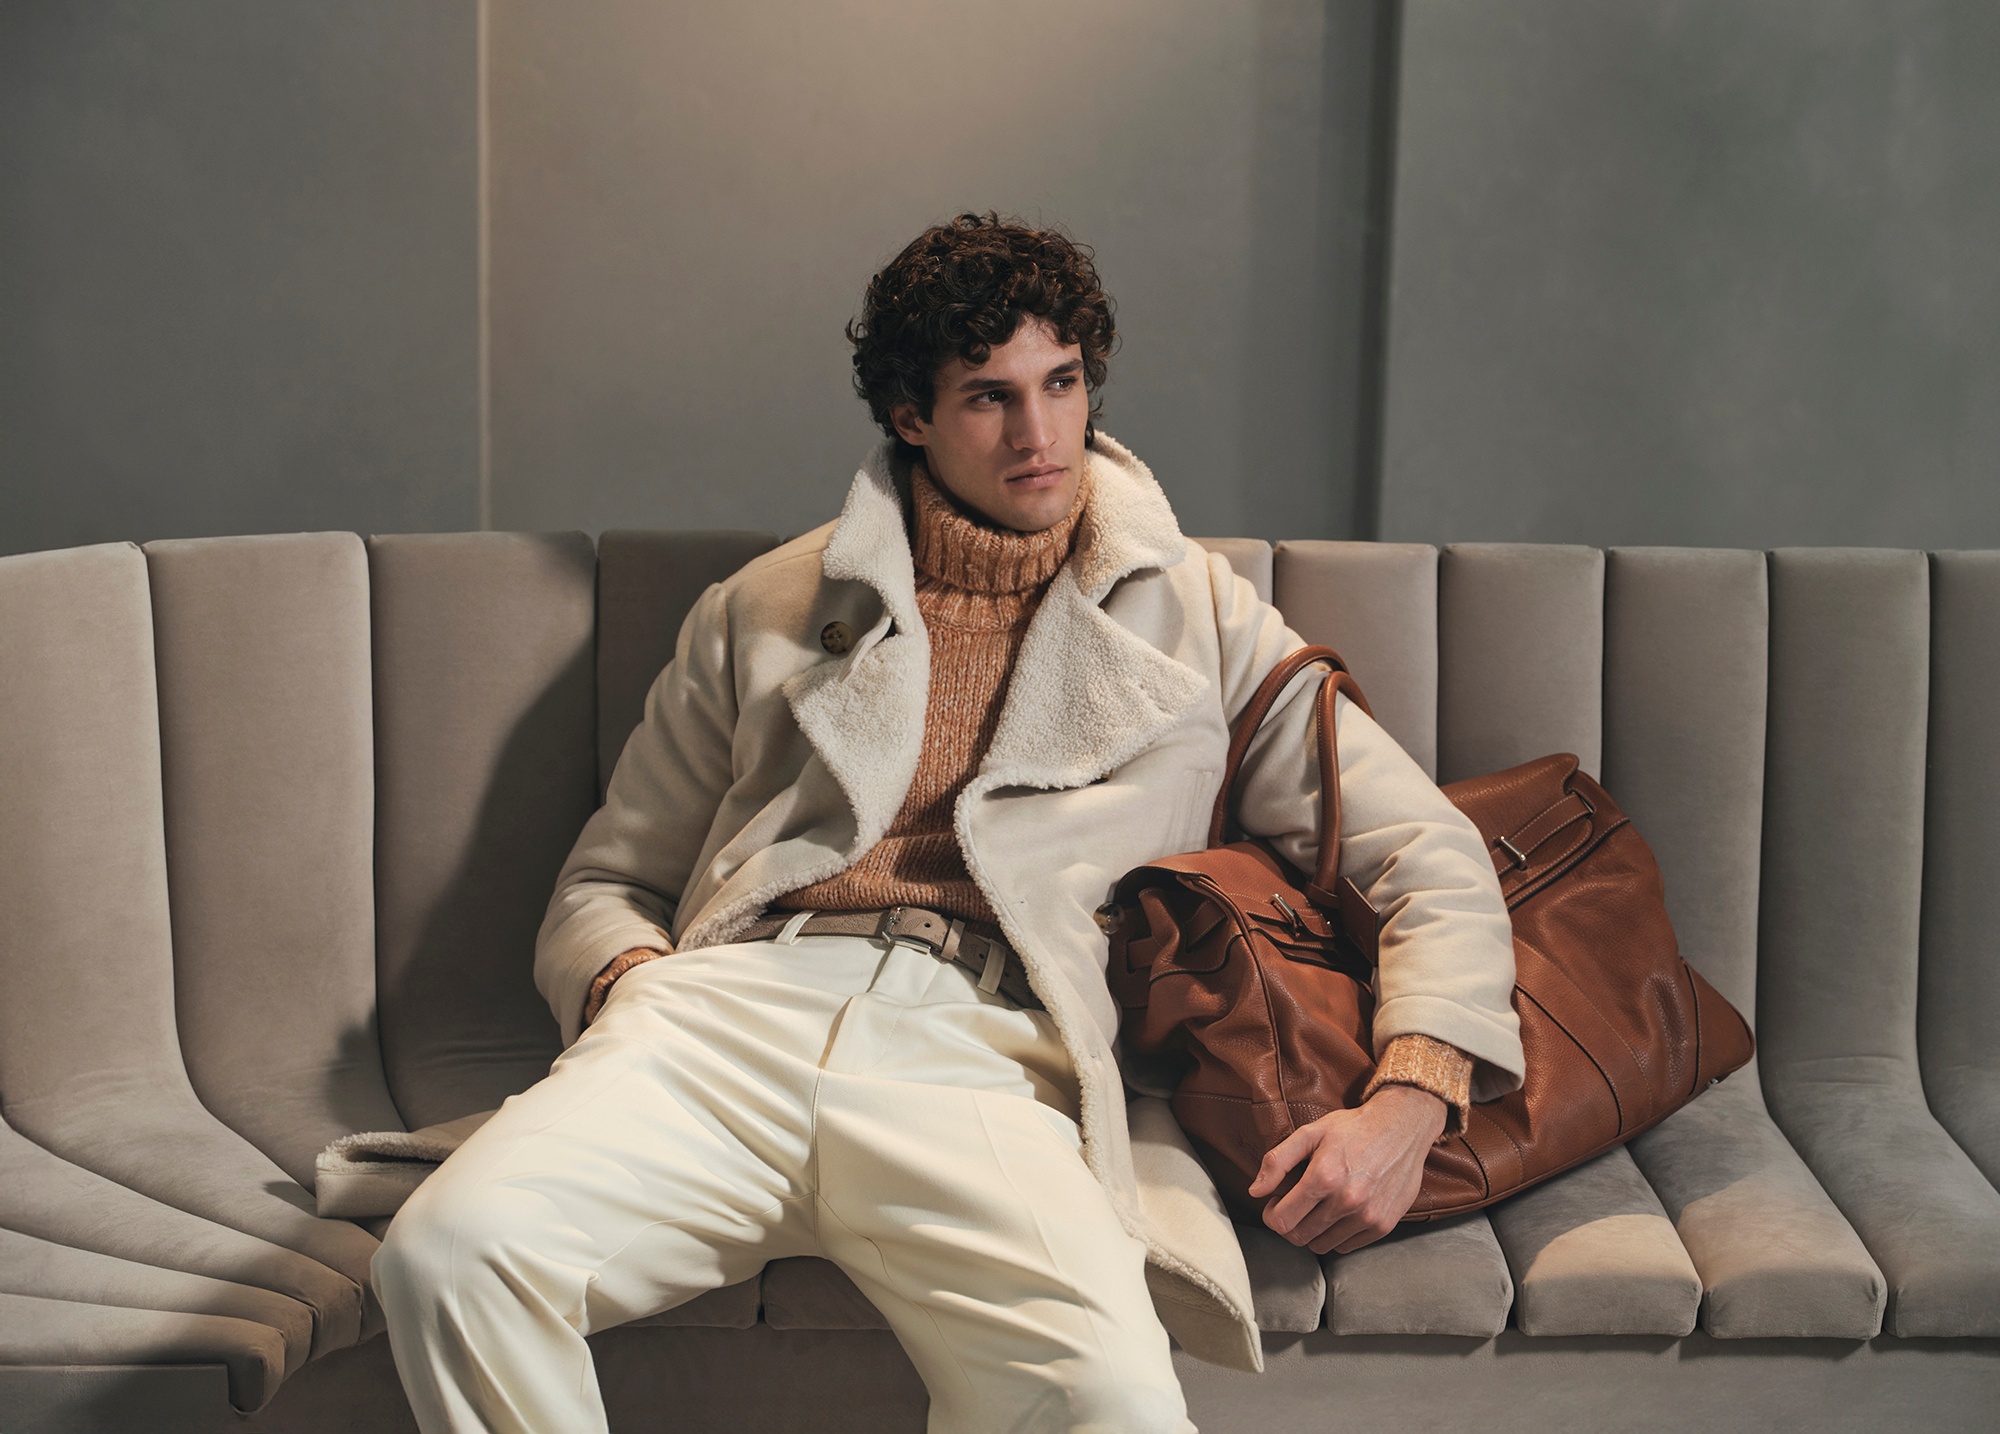 For the Fall/Winter 2024 collection, Brunello Cucinelli shifts to more daily casual looks to address its increasingly younger clientele. Image: Courtesy of Brunello Cucinelli